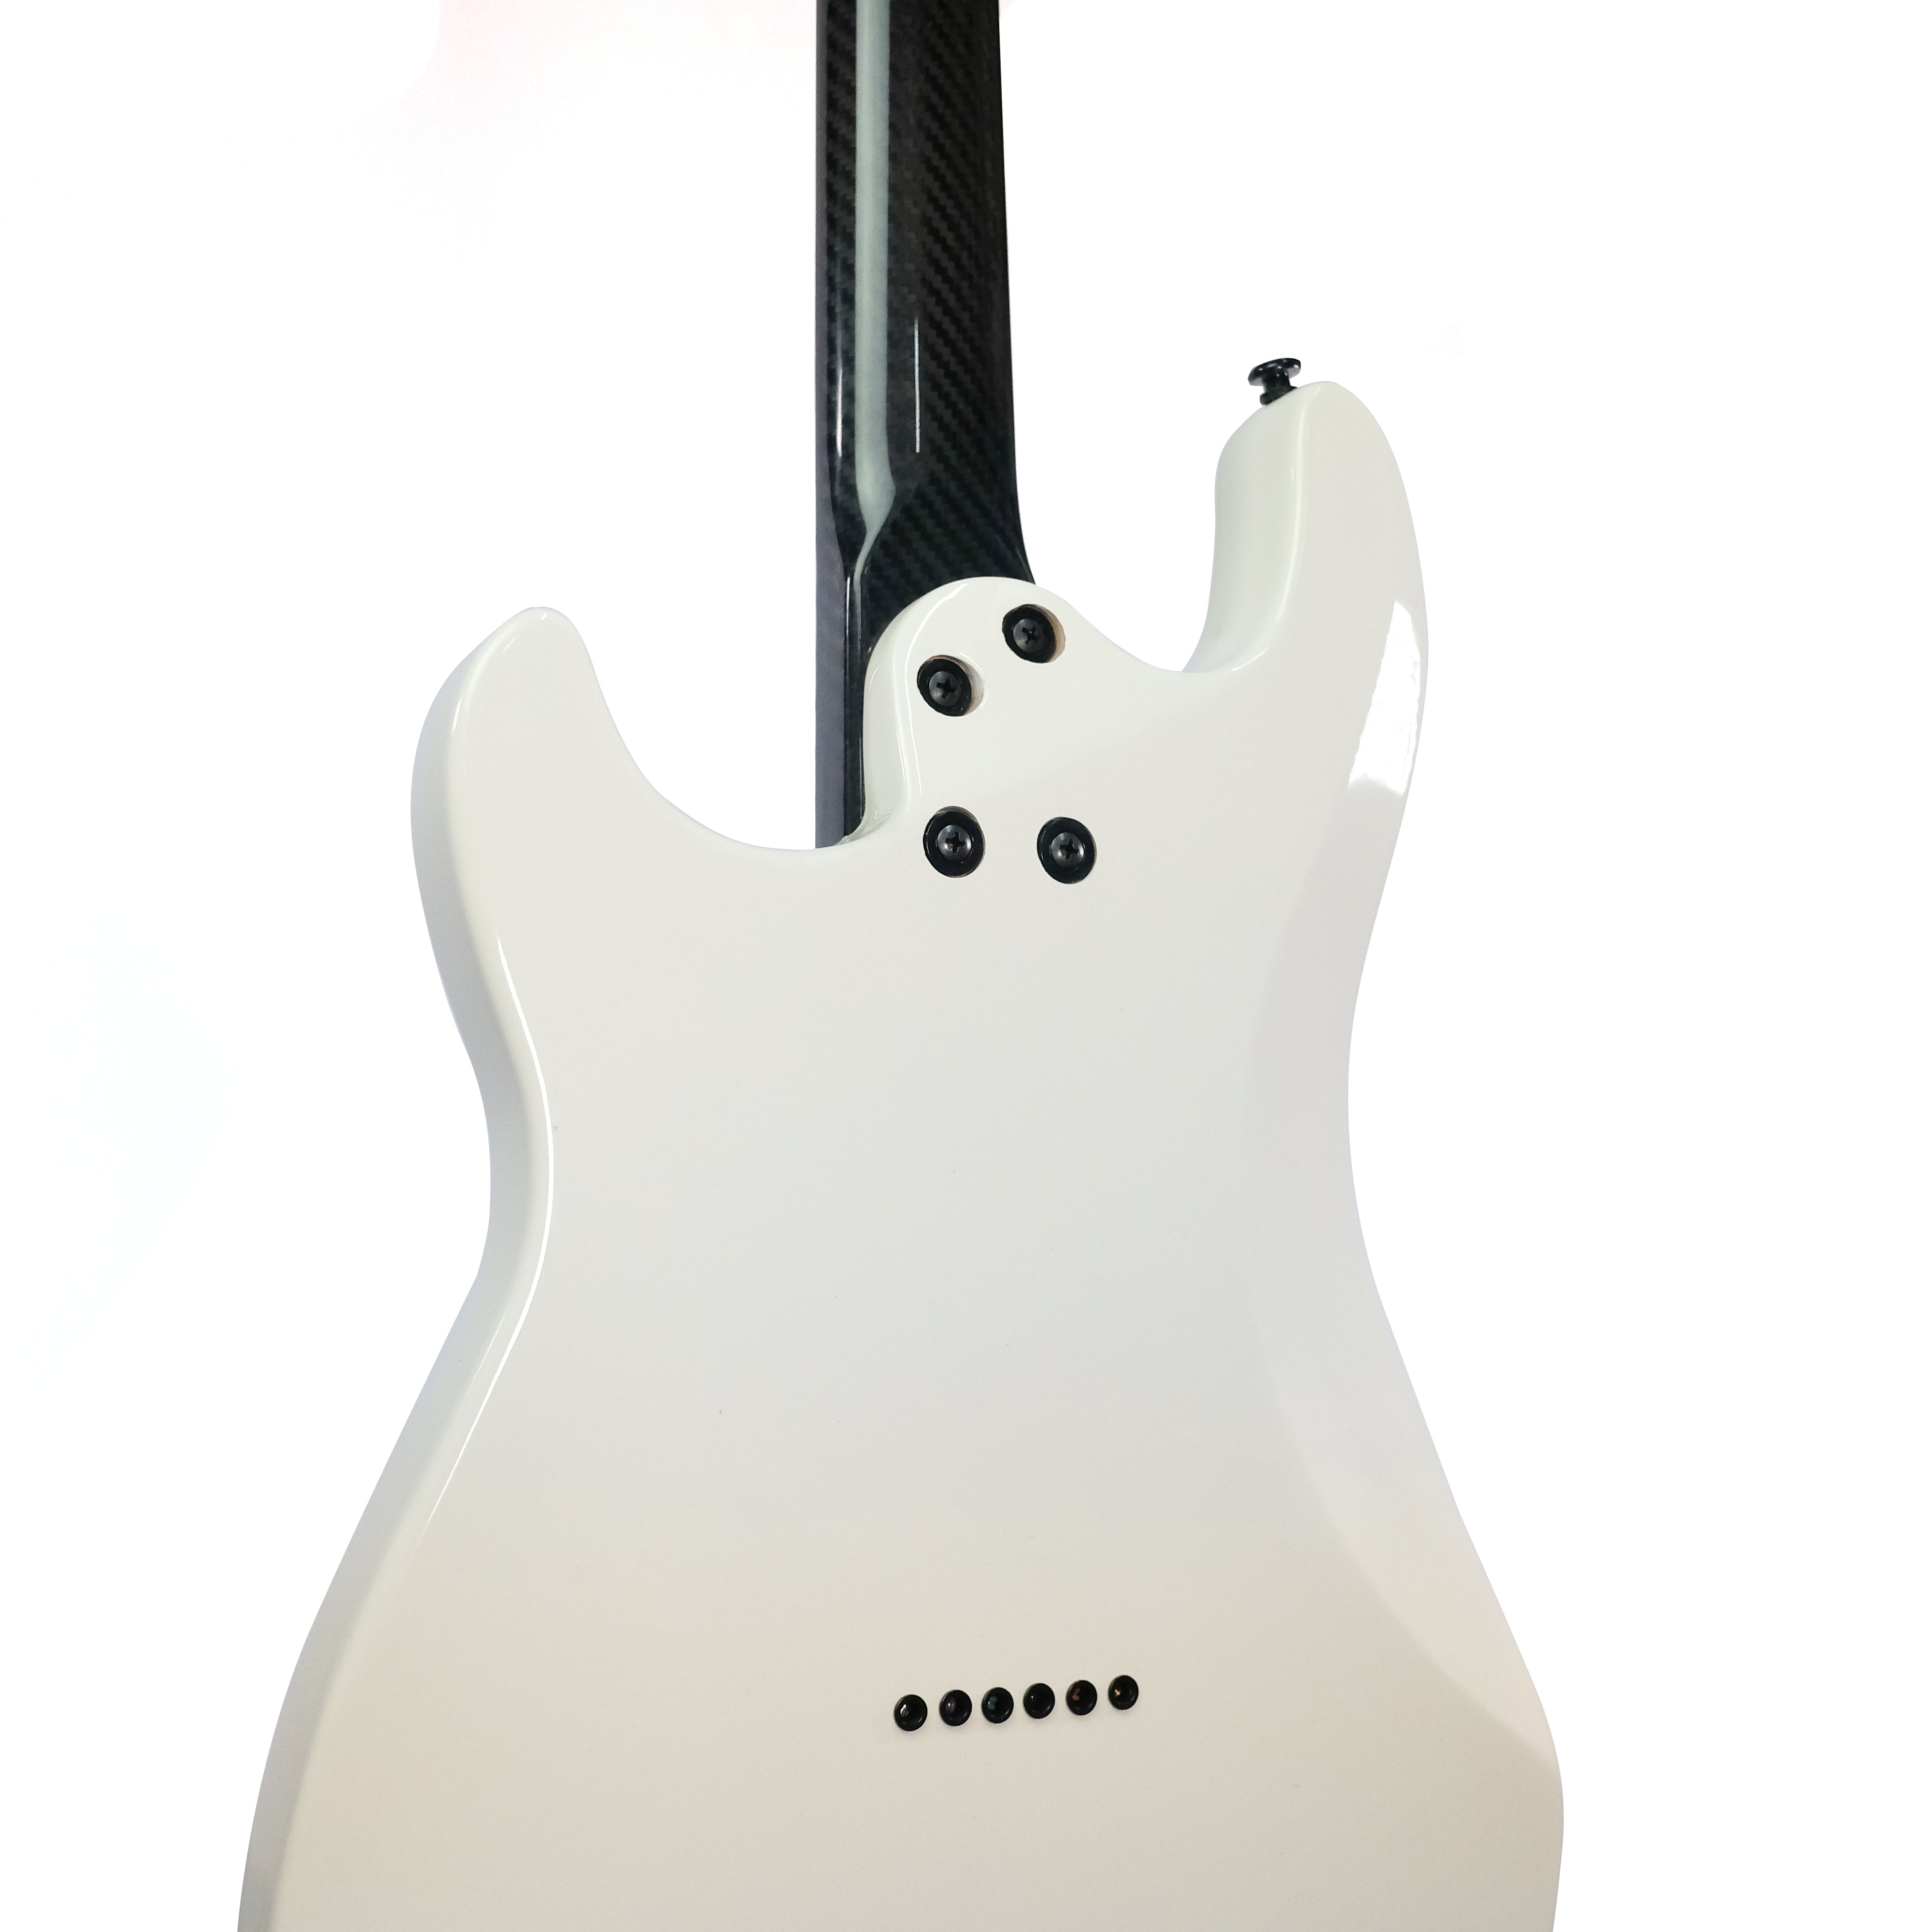 White Electric guitar on a white background (close up)